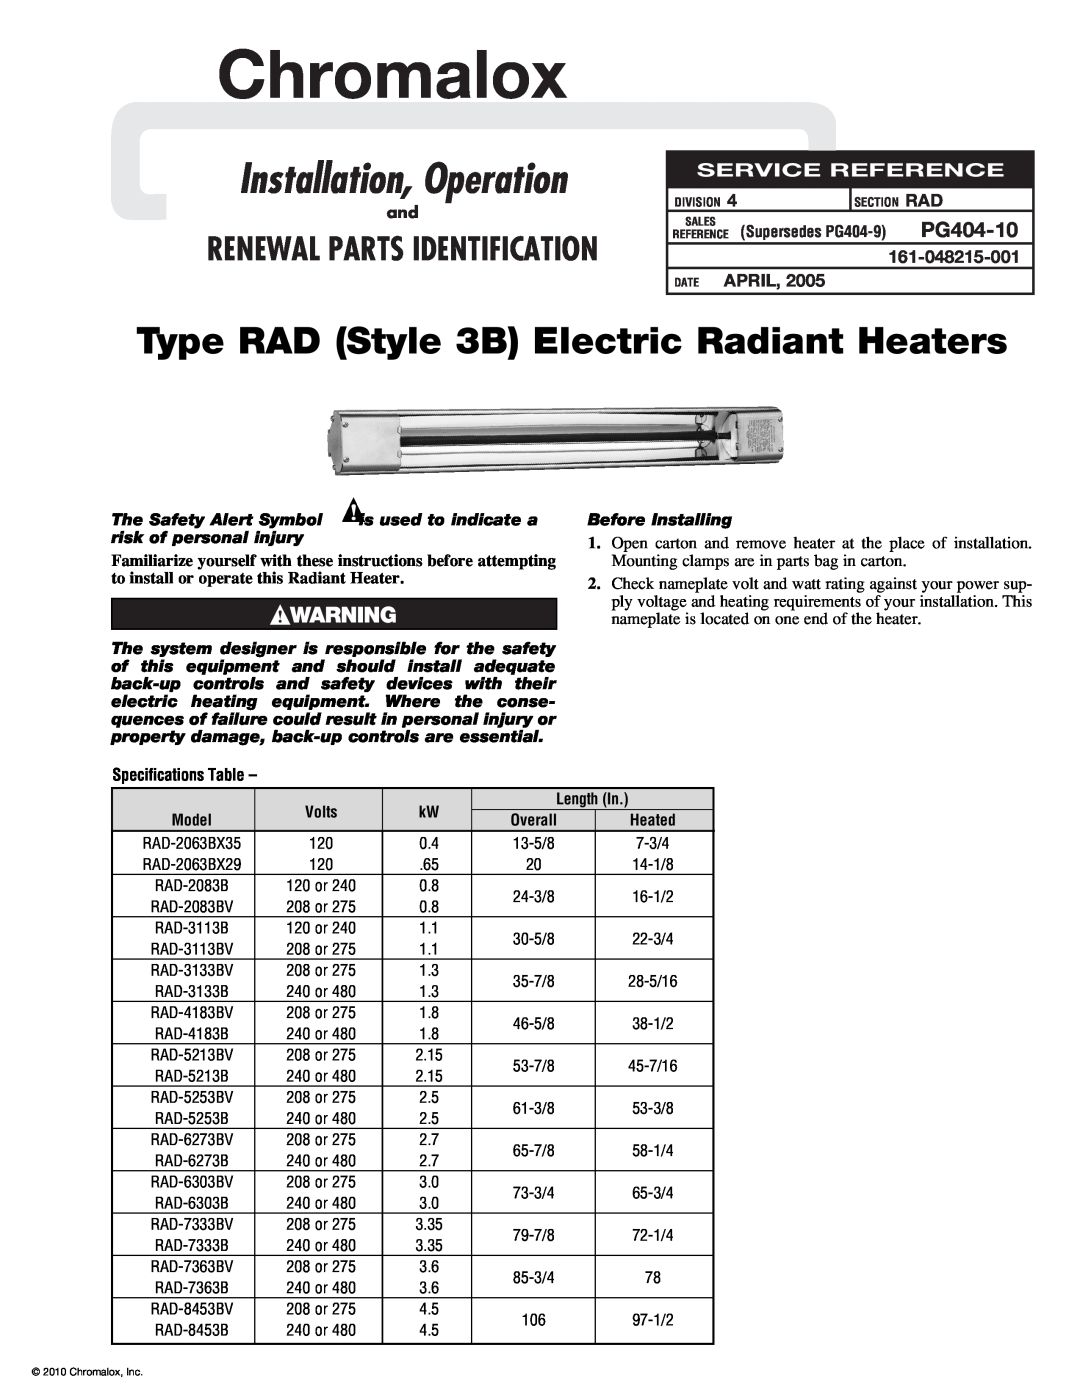 Chromalox RAD-2063BX35 specifications Specifications Table, Chromalox, Installation, Operation, Service Reference 